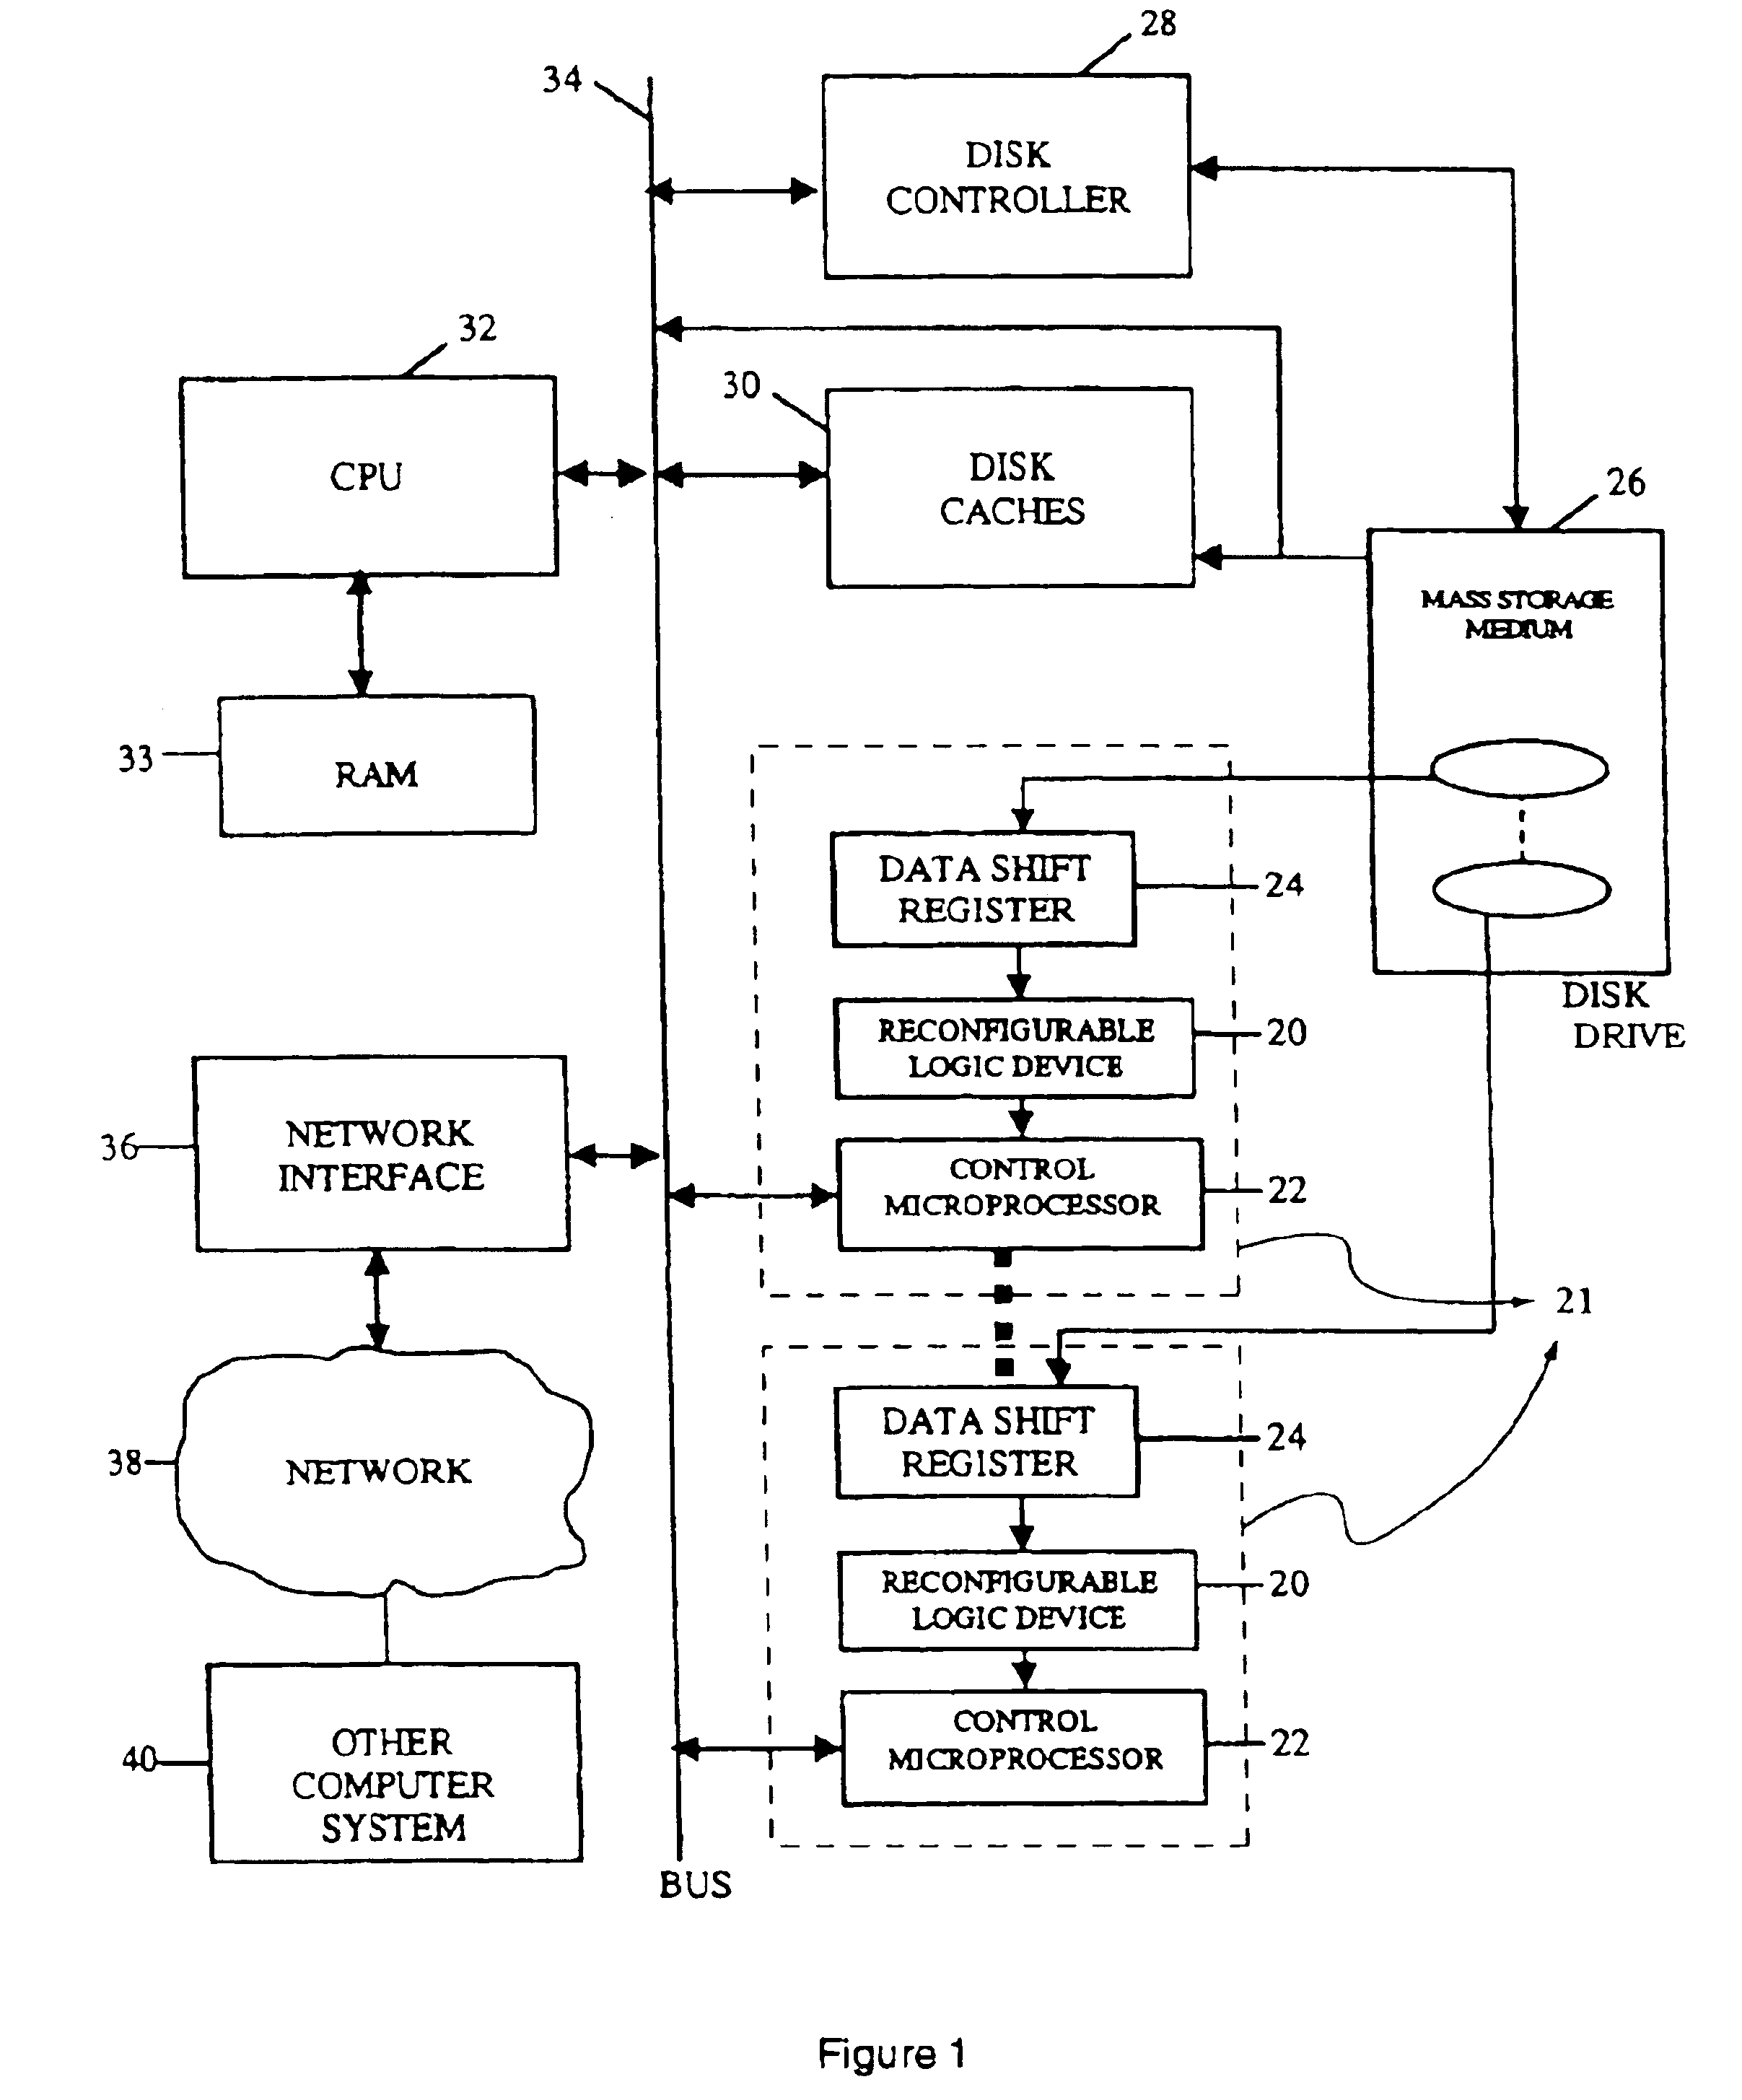 Associative database scanning and information retrieval using FPGA devices